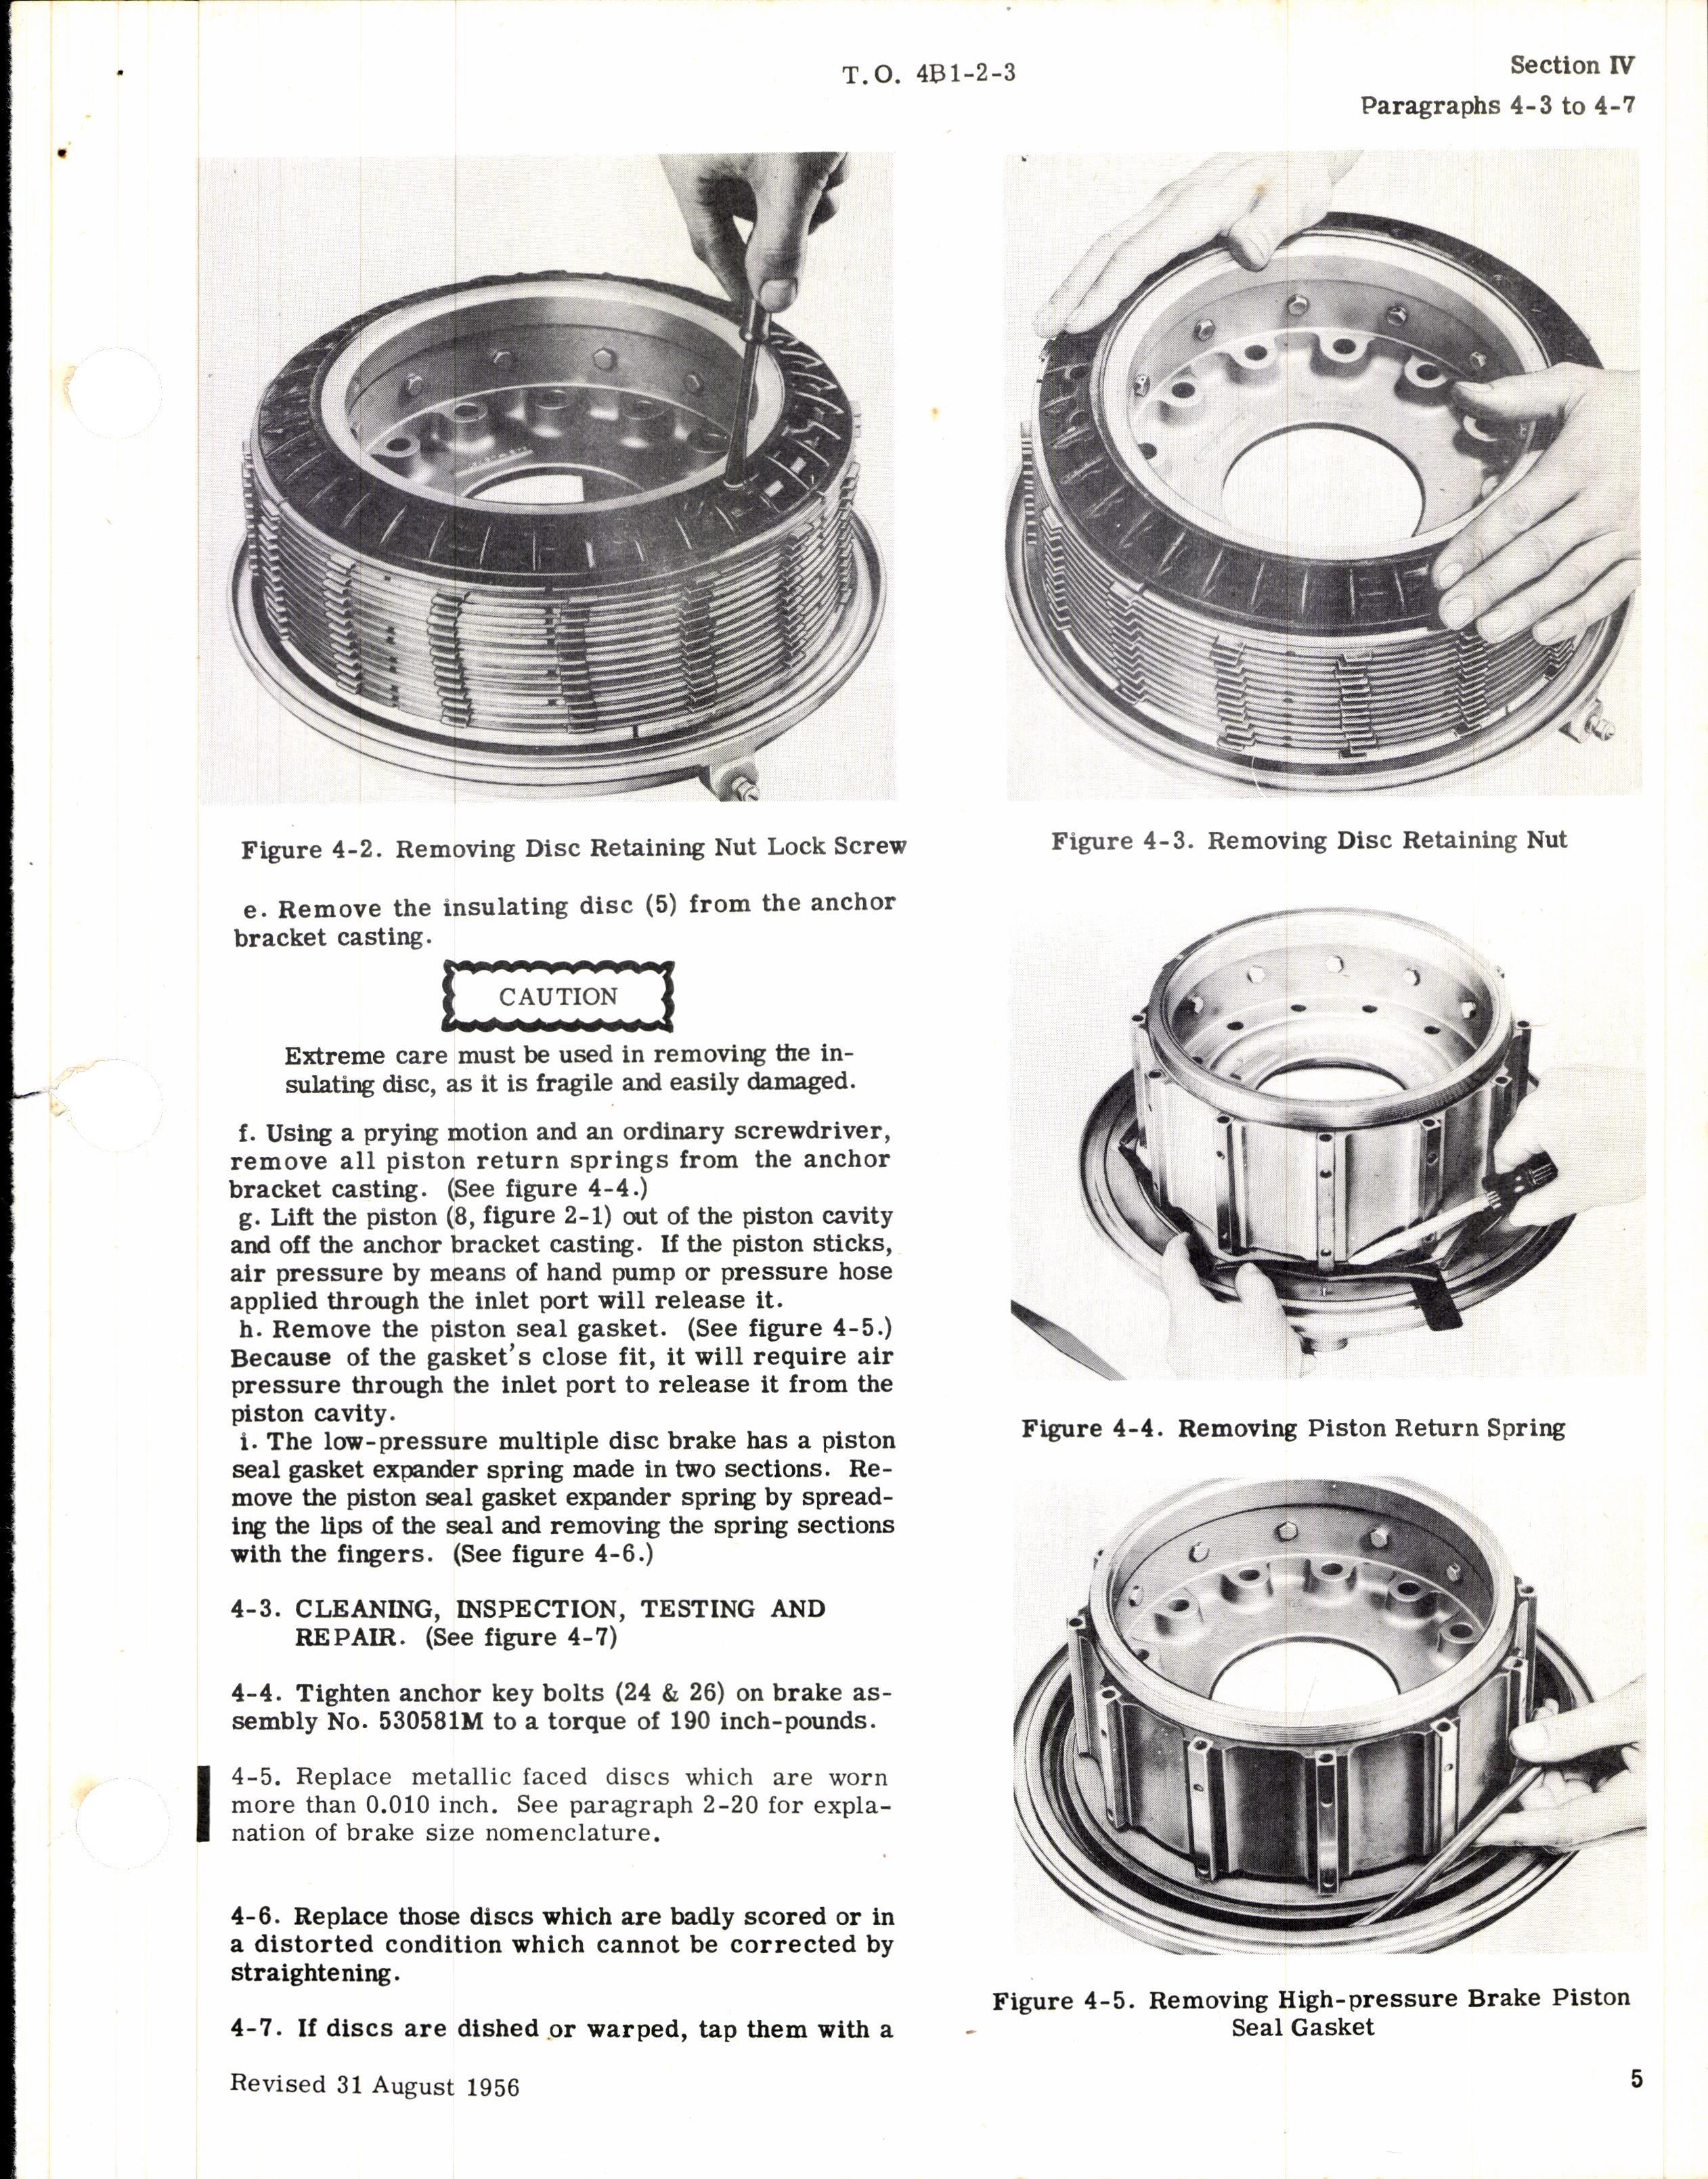 Sample page 3 from AirCorps Library document: Handbook Overhaul Instructions for Multiple Disc Brakes (Goodyear)